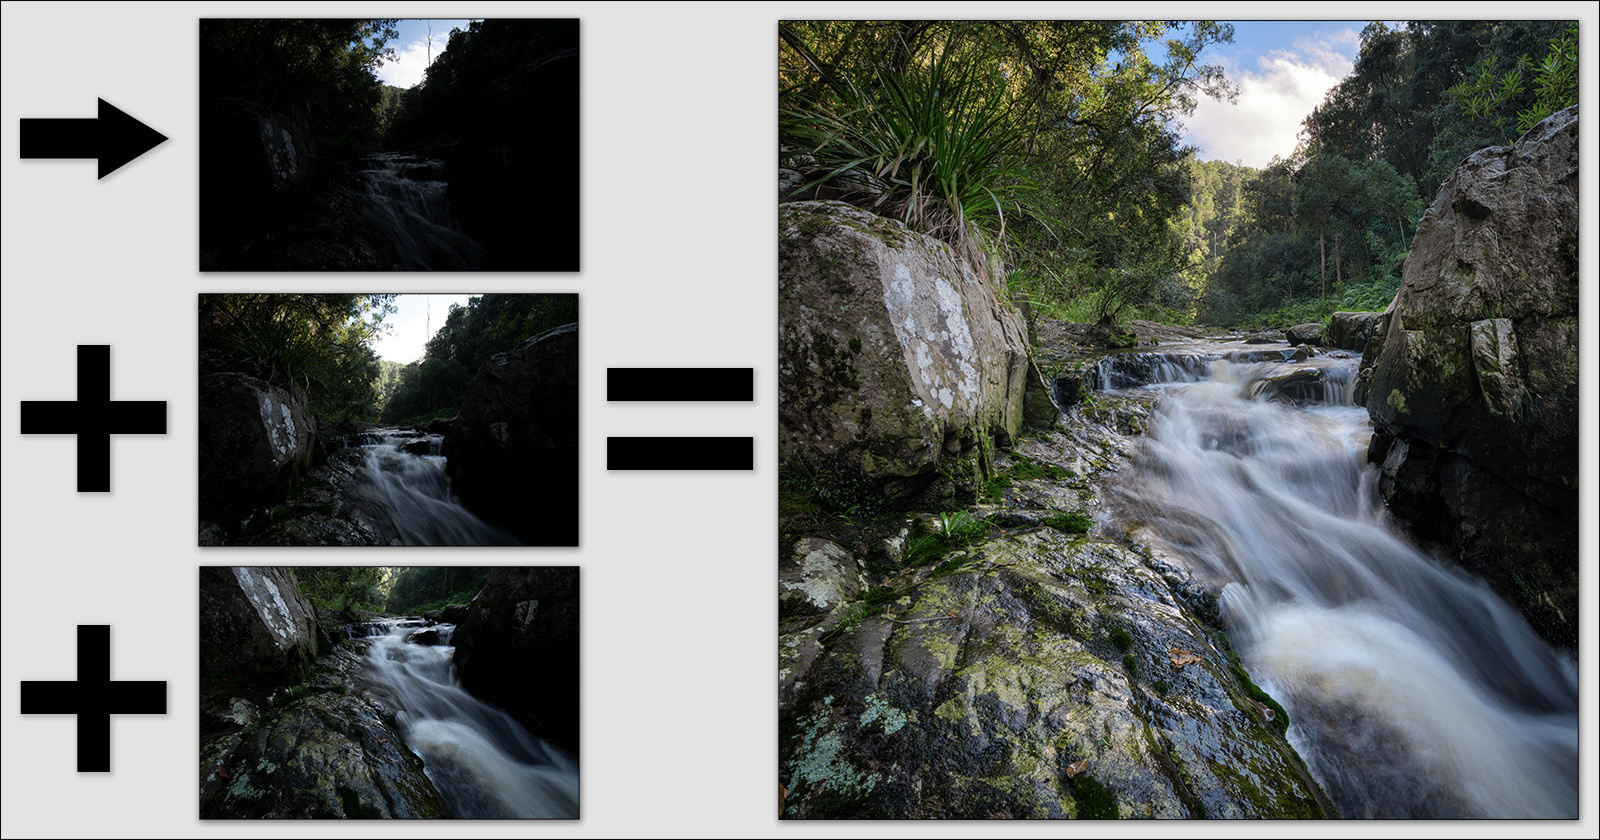 How to Deal with Extreme Dynamic Range in Landscape Photography